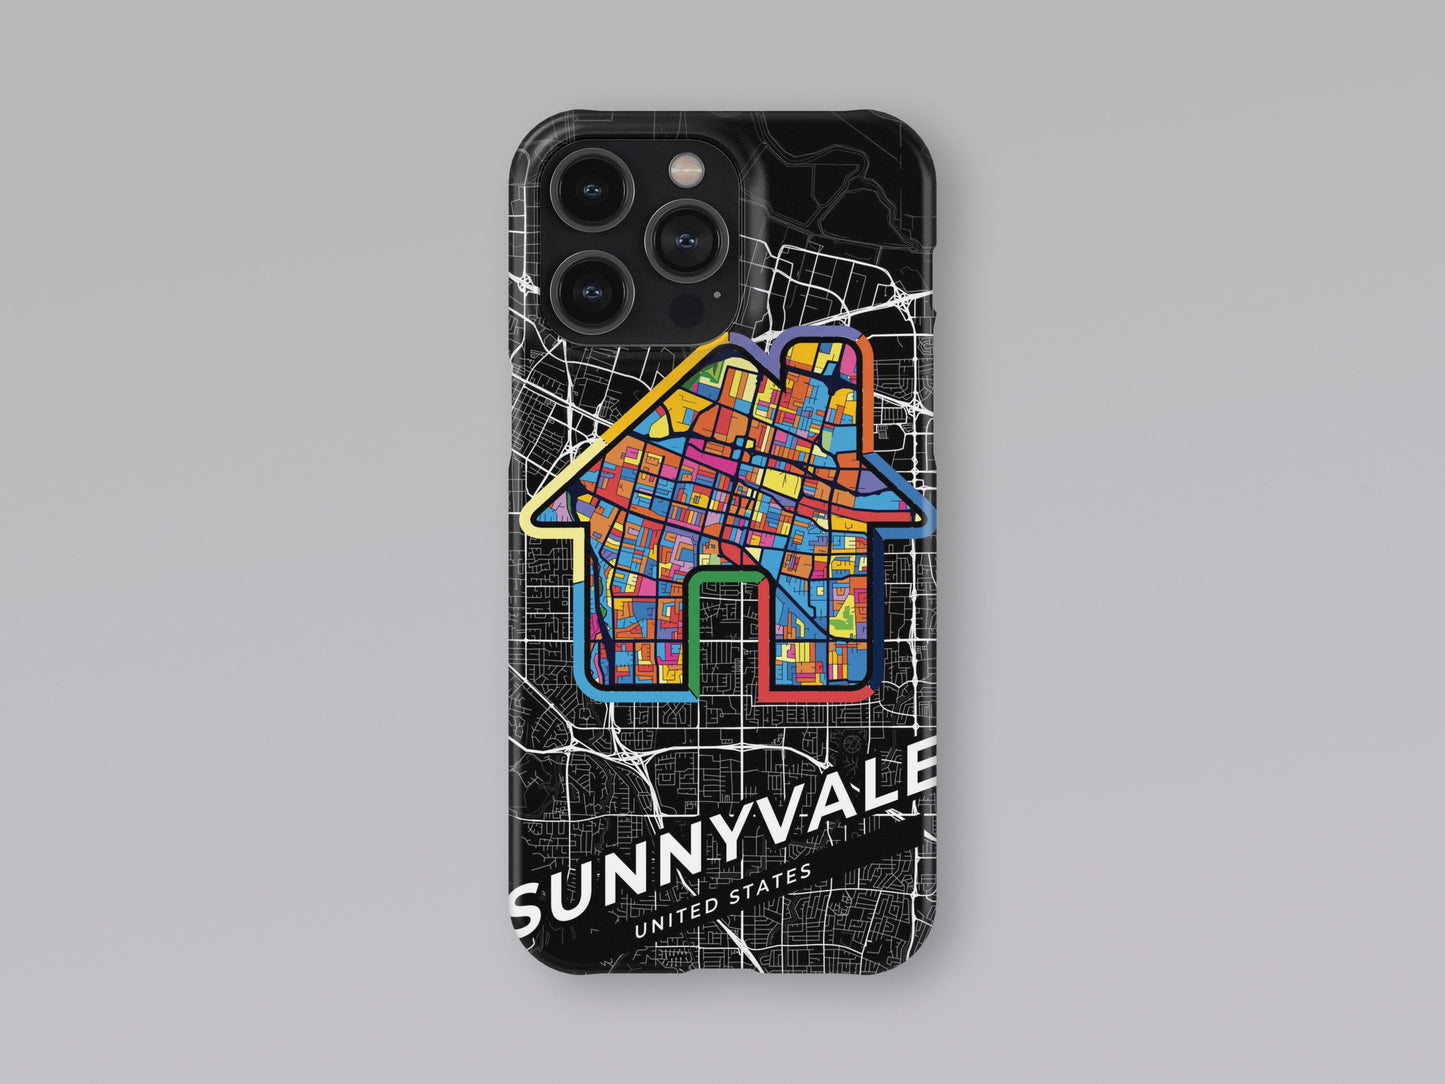 Sunnyvale California slim phone case with colorful icon 3